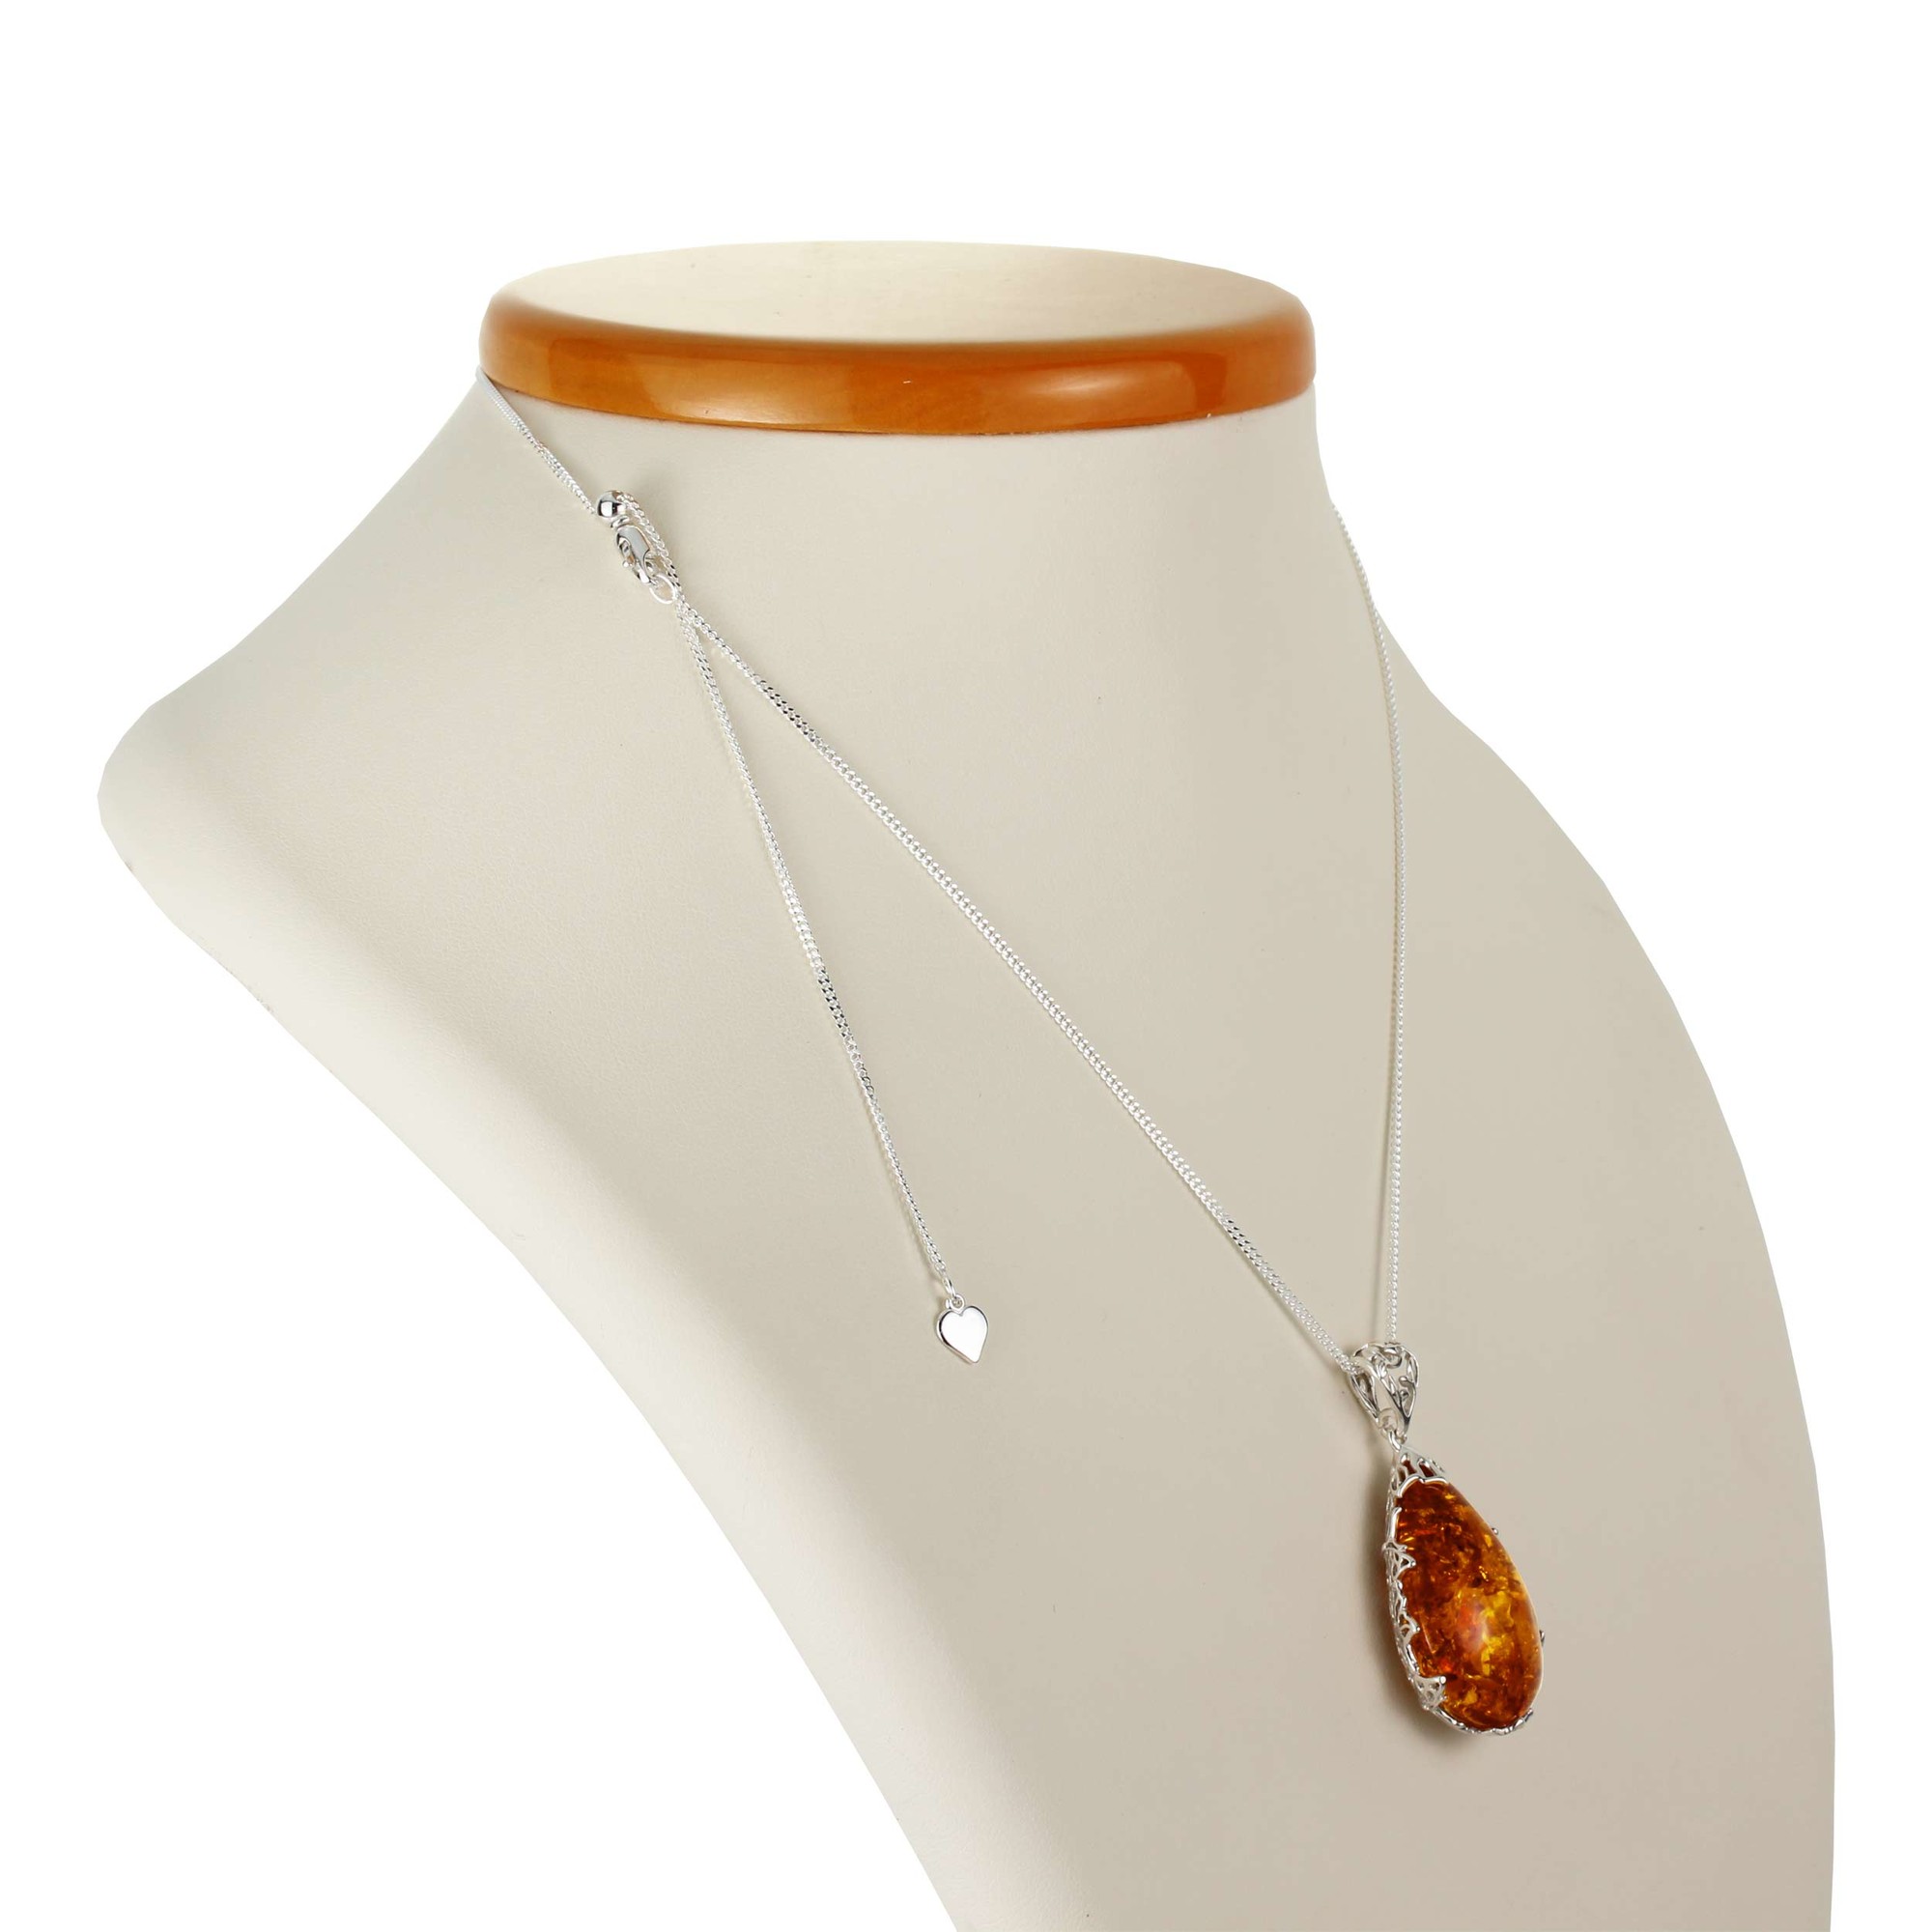 Petite Natural Healing Baltic Amber & Sterling Silver Pendant Necklace